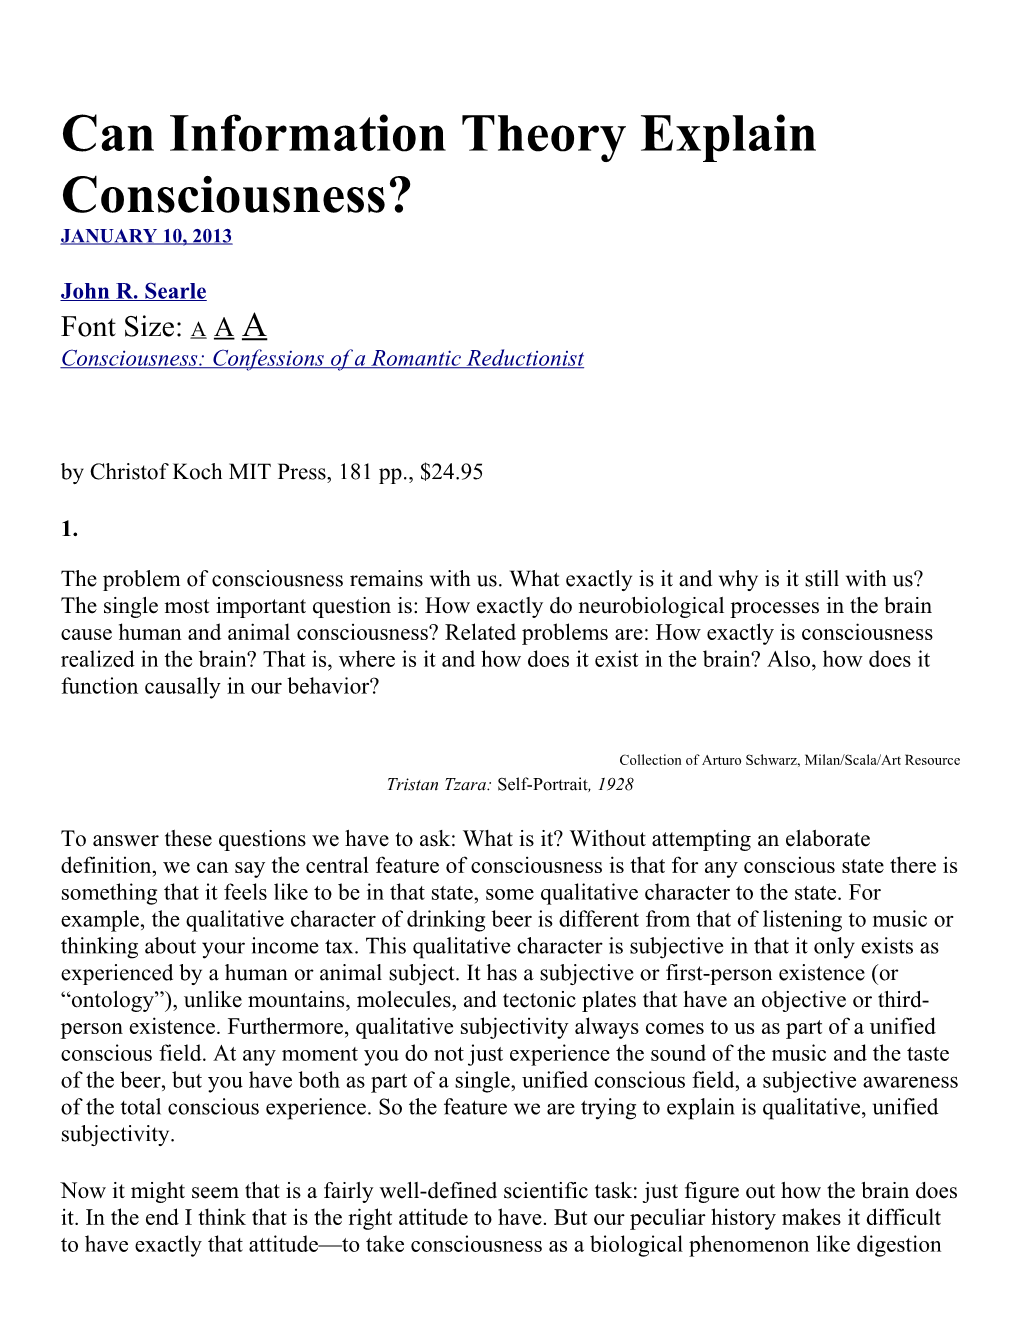 Can Information Theory Explain Consciousness?